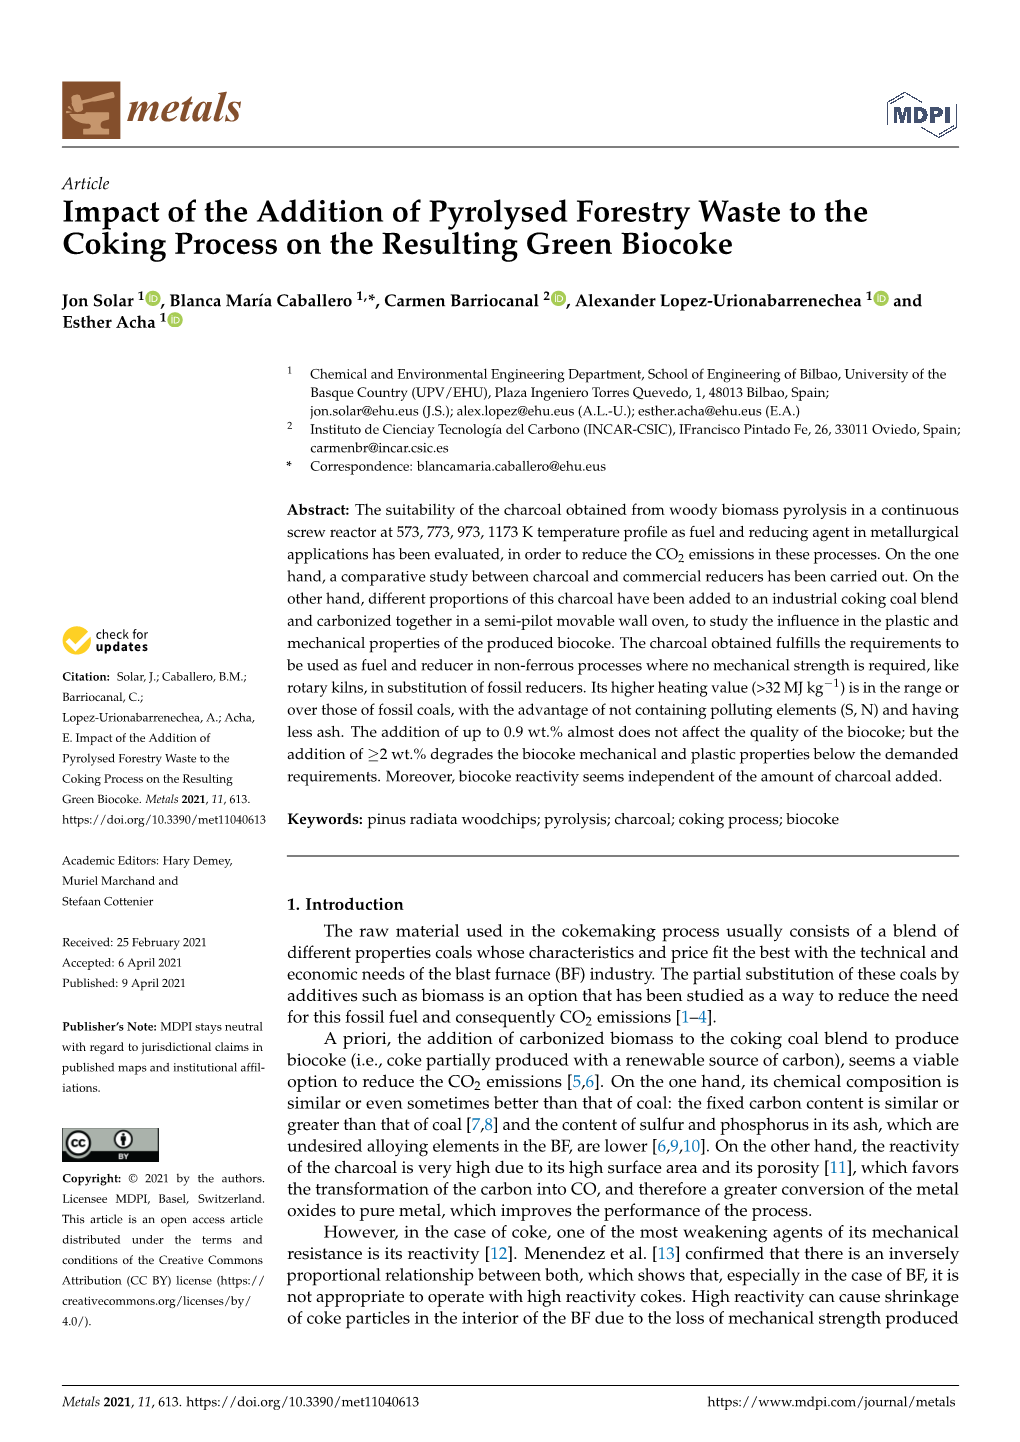 Impact of the Addition of Pyrolysed Forestry Waste to the Coking Process on the Resulting Green Biocoke